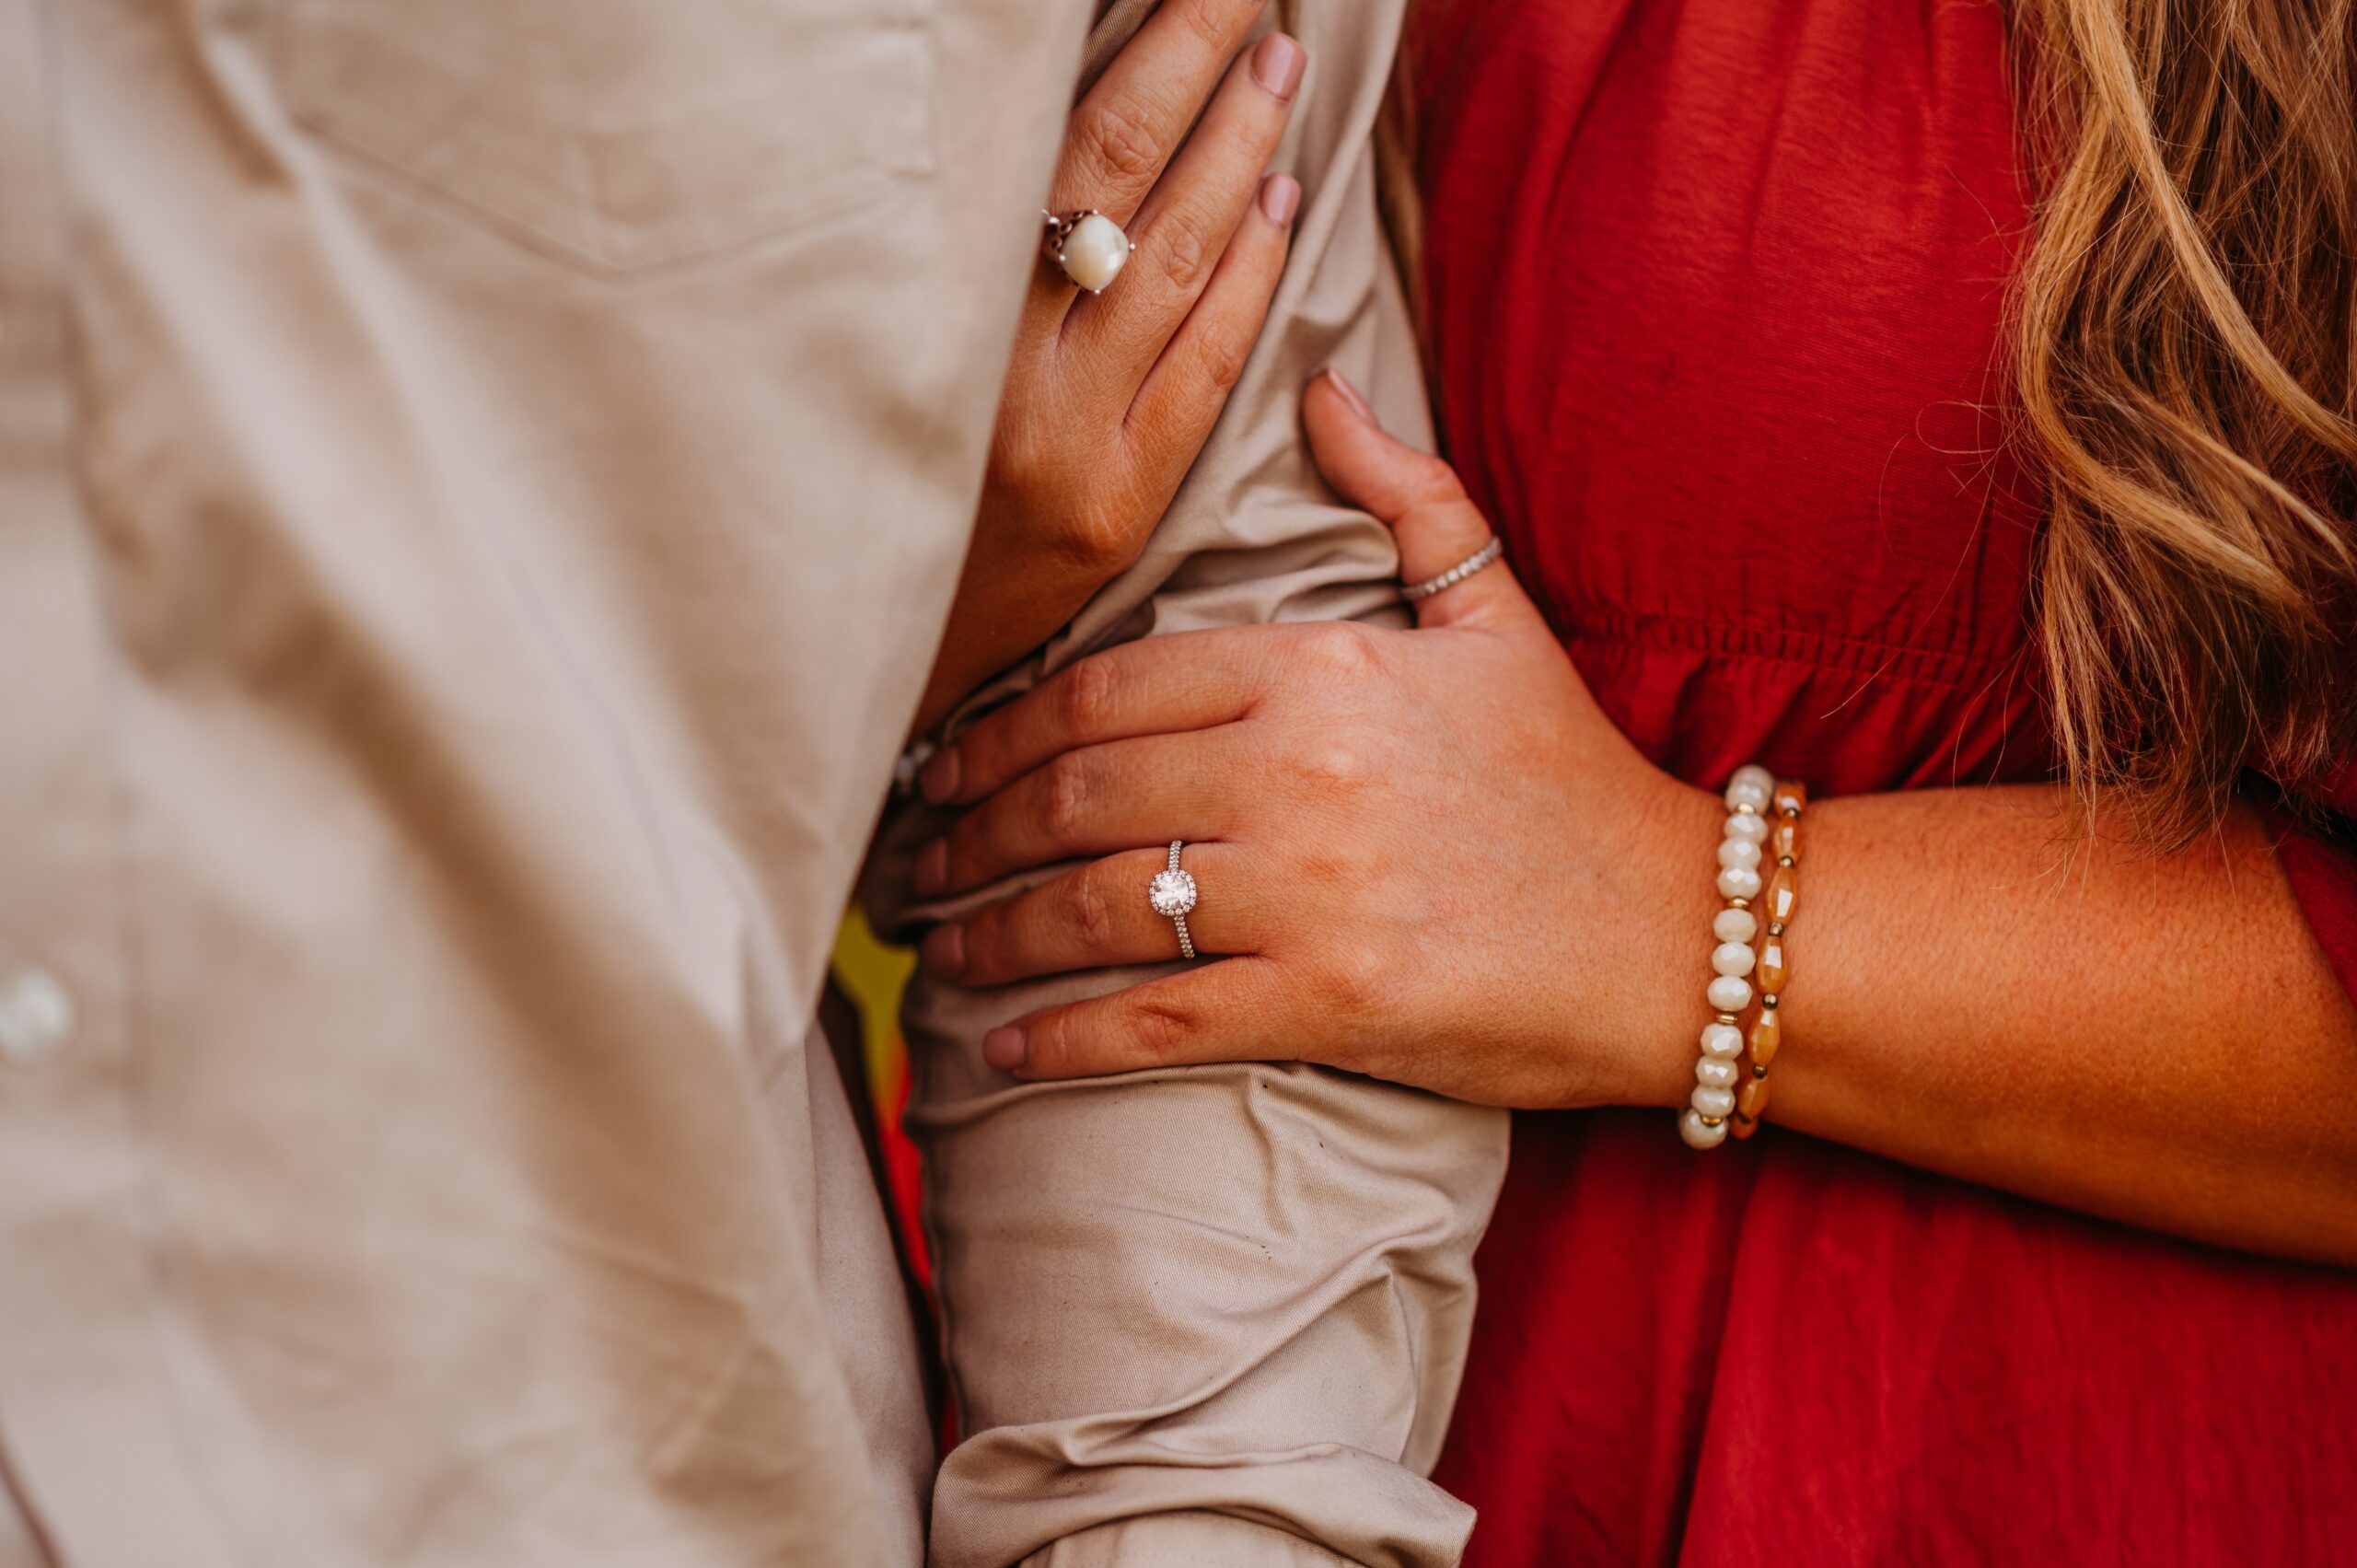 engagement ring picture as a woman hugs a man's arm